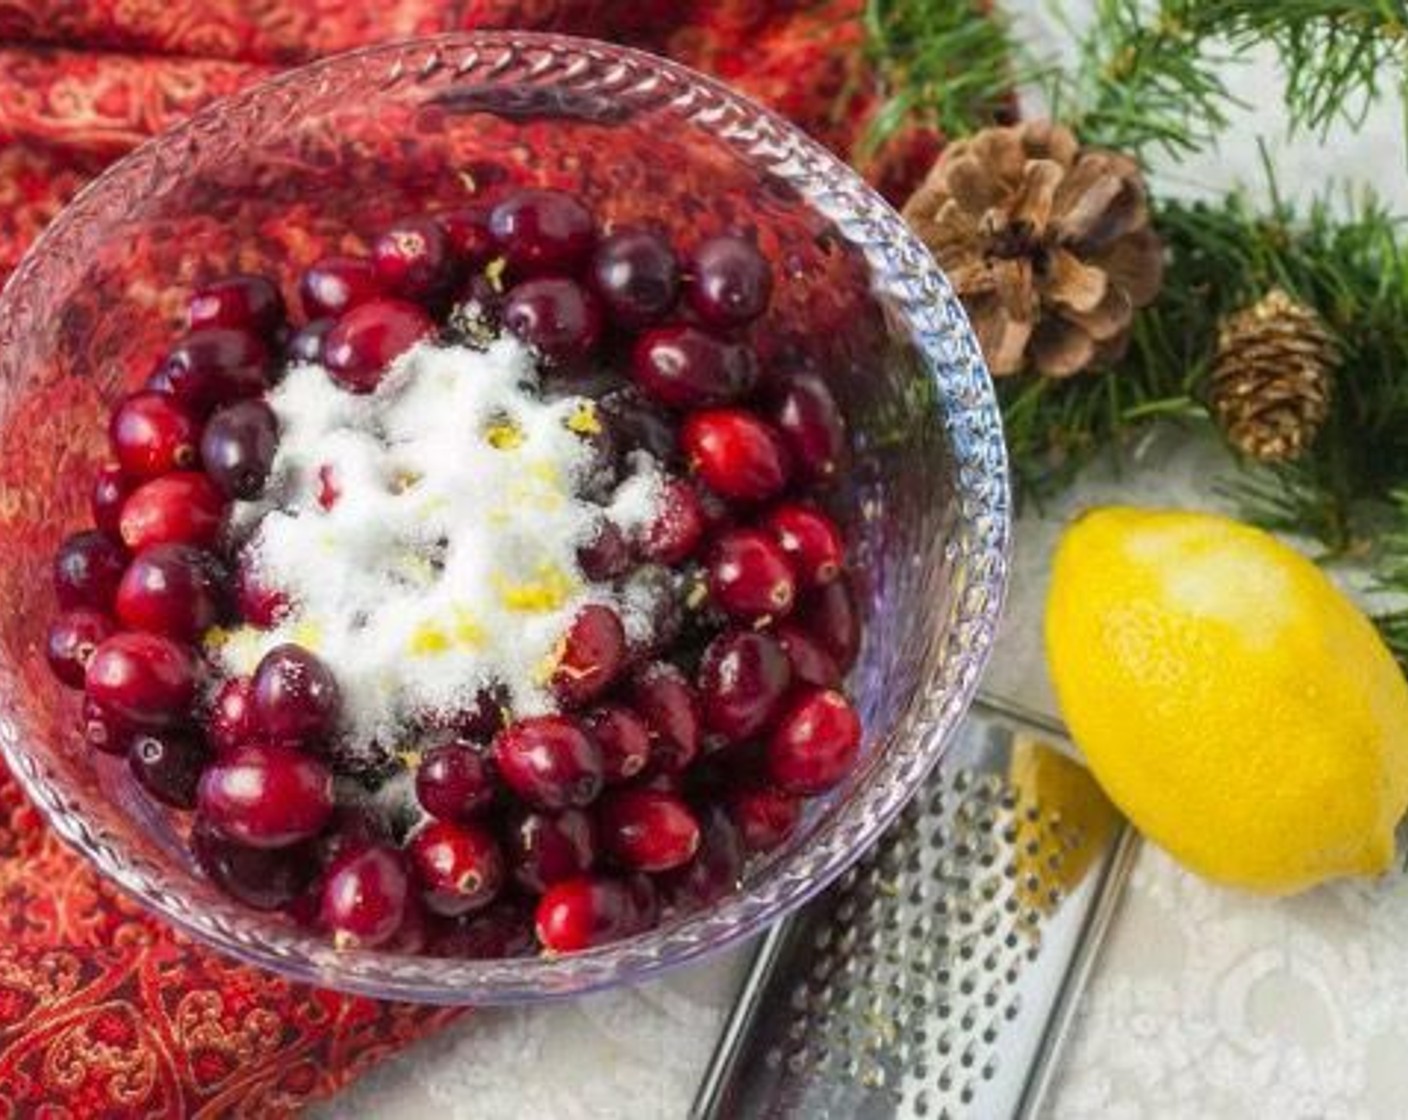 step 2 In a medium bowl, toss together Fresh Cranberries (2 3/4 cups), Granulated Sugar (1/2 cup), Water (1/4 cup), zest and juice from Lemon (1), Ground Ginger (1/4 tsp), Ground Nutmeg (1 pinch), Salt (1 pinch), and Coarse Sugar (to taste). Spread in a single layer on a small baking sheet.